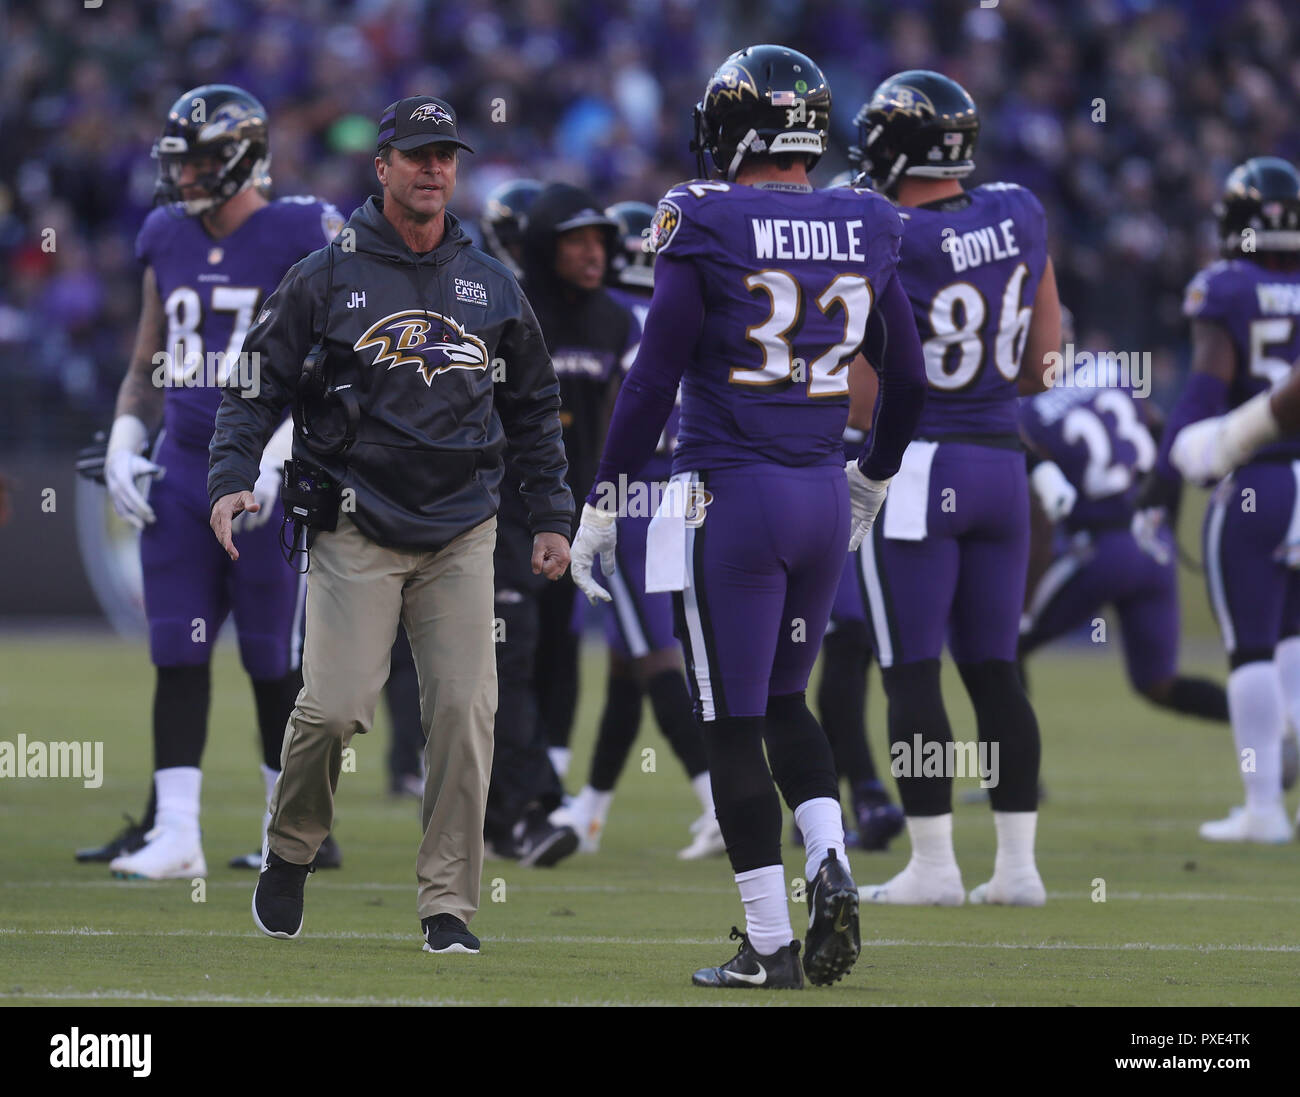 Baltimore, USA. 21st Oct 2018. Baltimore Ravens head coach John Harbaugh  congratulates players after a fumble recovery during a game against the New  Orleans Saints at M&T Bank Stadium in Baltimore, MD